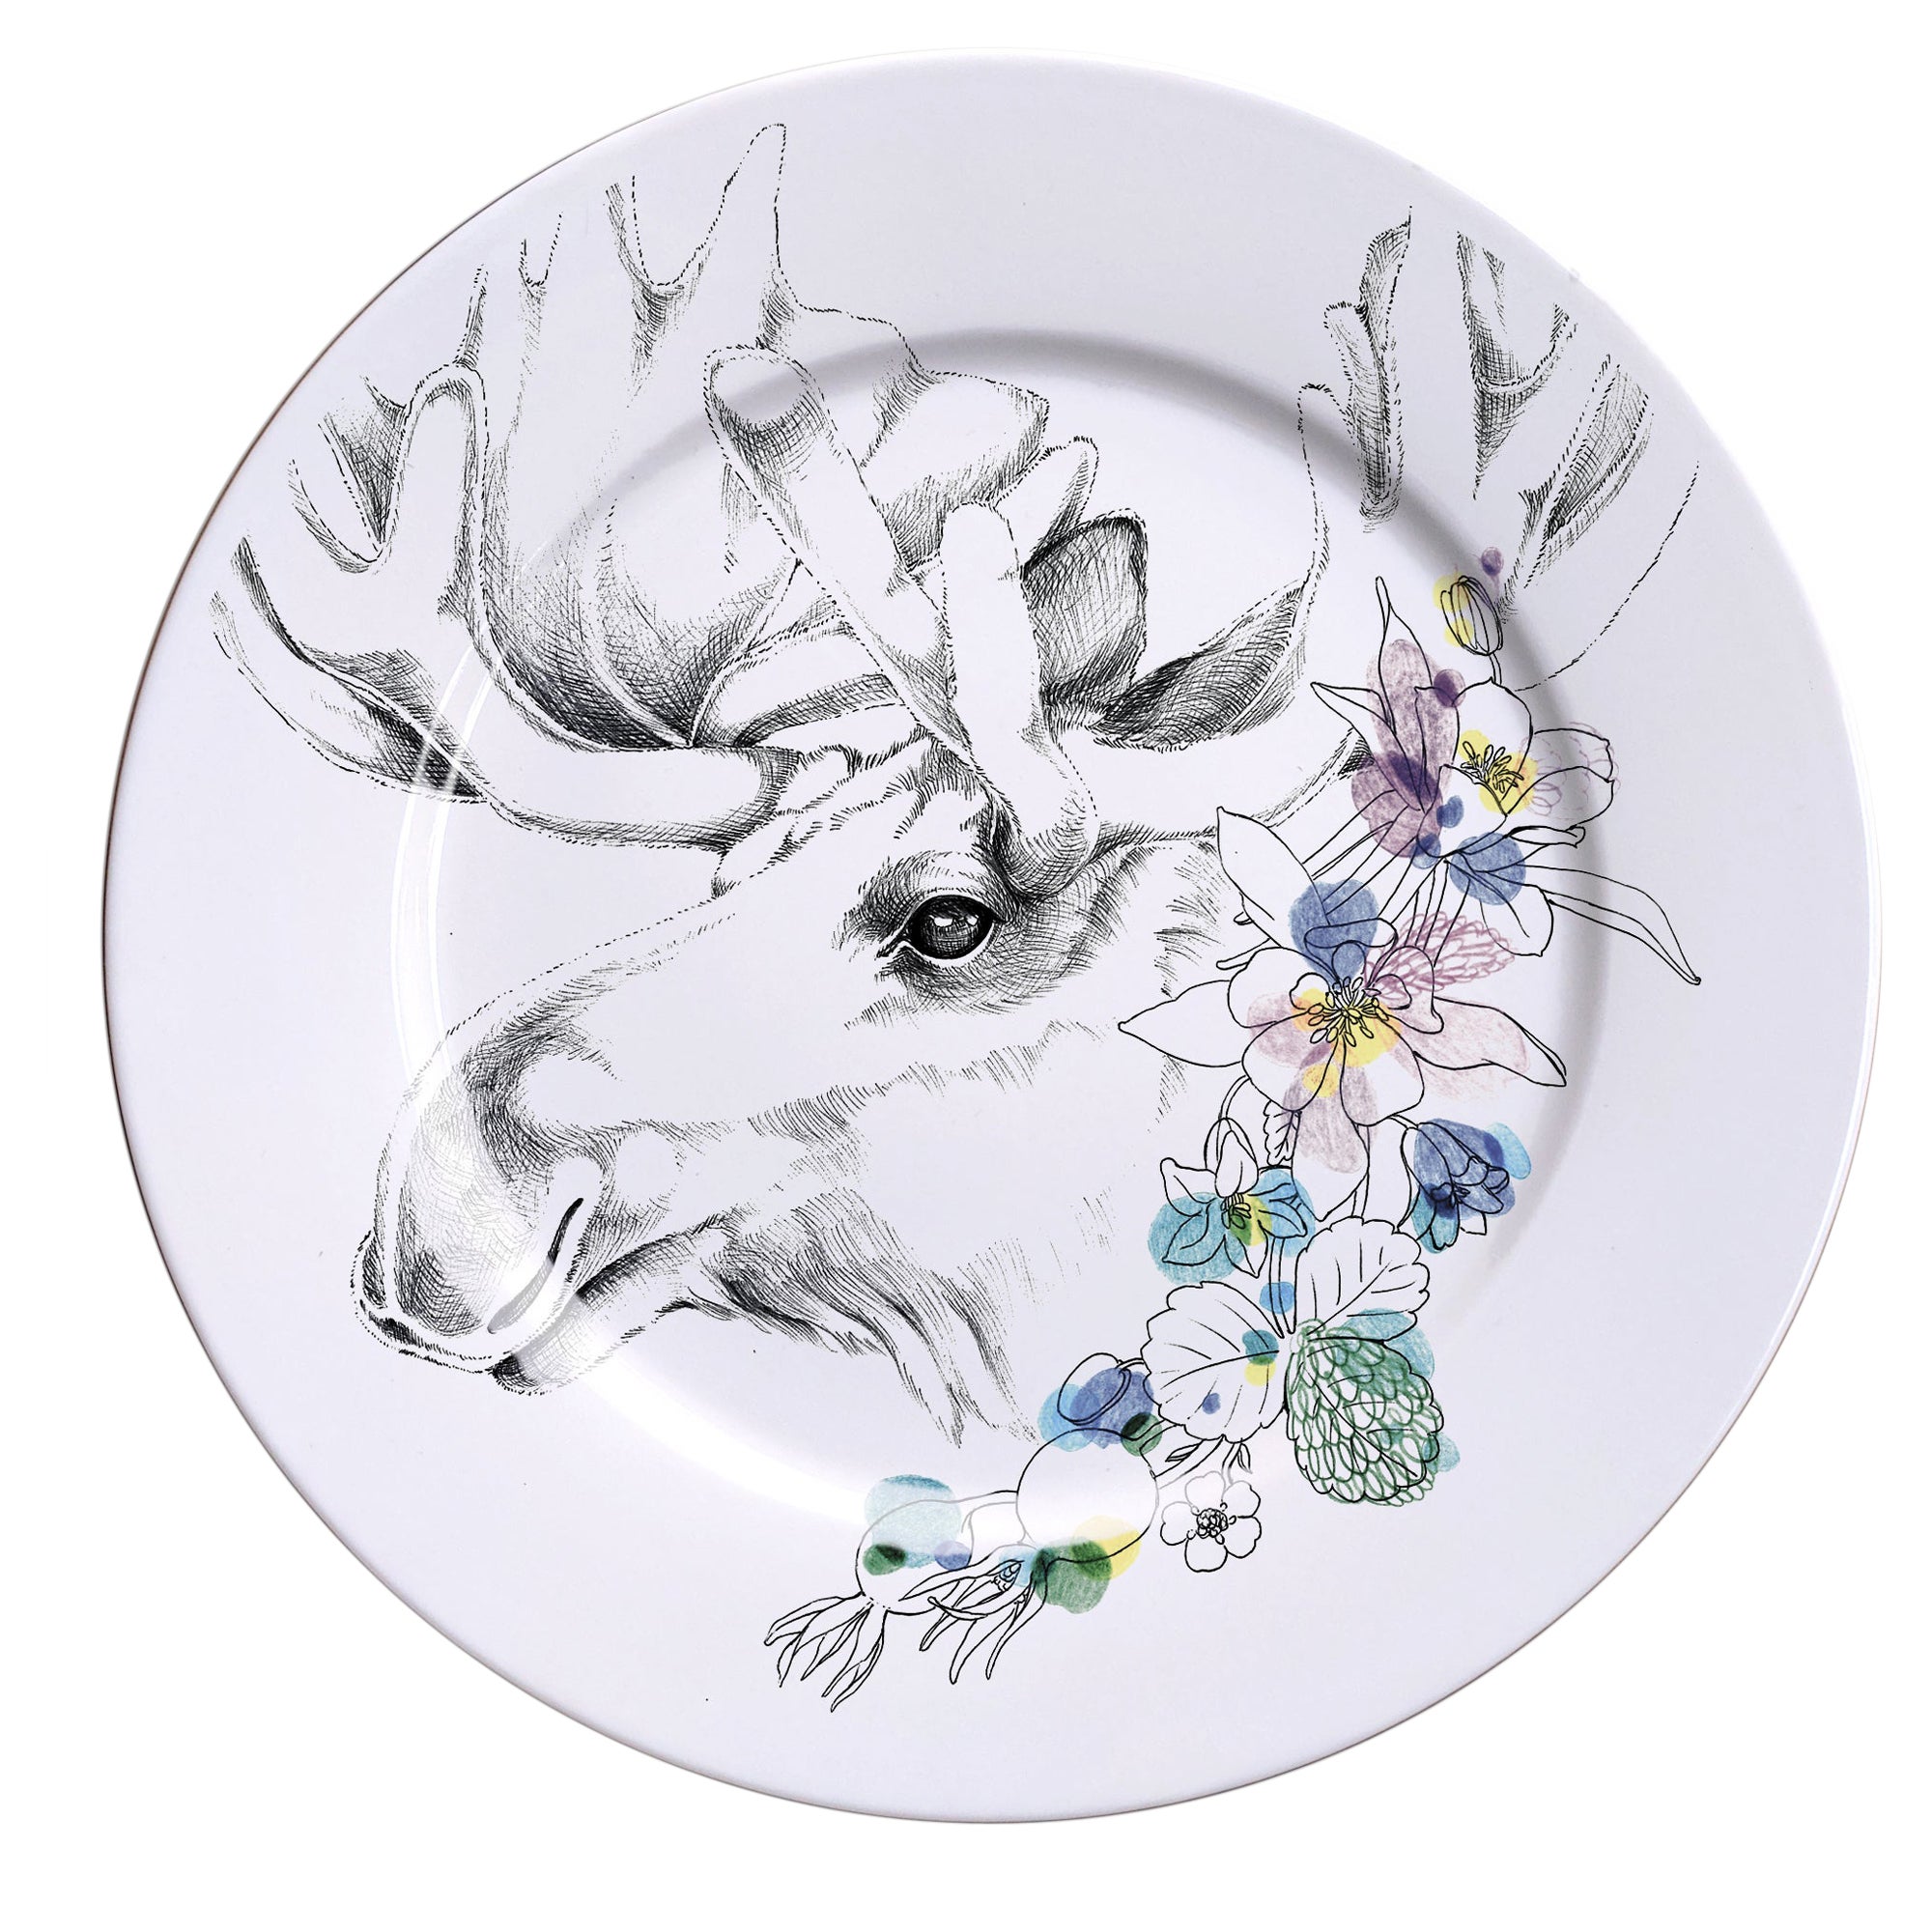 Ode to the Woods, Contemporary Porcelain Dinner Plate Whit Moose and Flowers For Sale